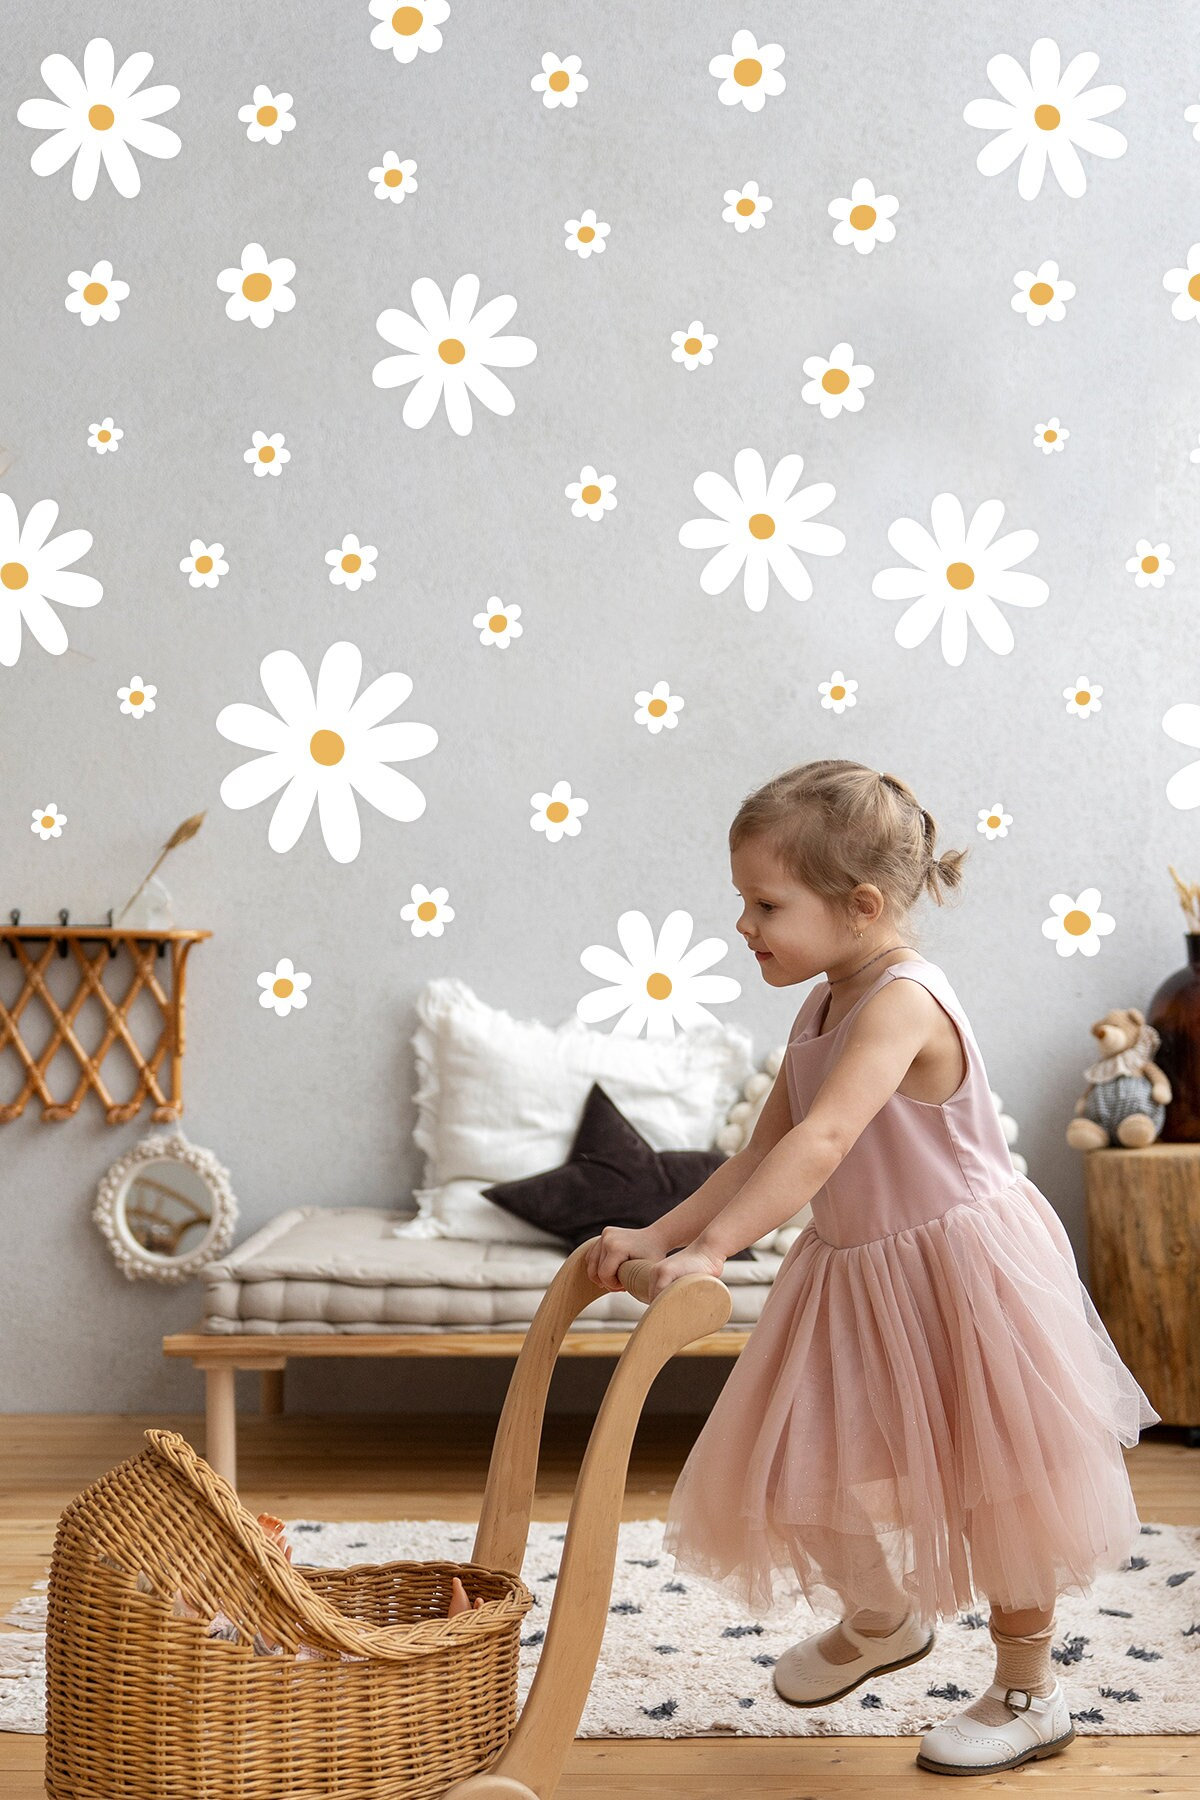 8 Sheet 160 Pcs Daisy Wall Decal Flower Wall Decal Daisy Decor White Daisy  Decals Floral Decals Peel and Stick Aesthetic for Wall Bedroom Living Room